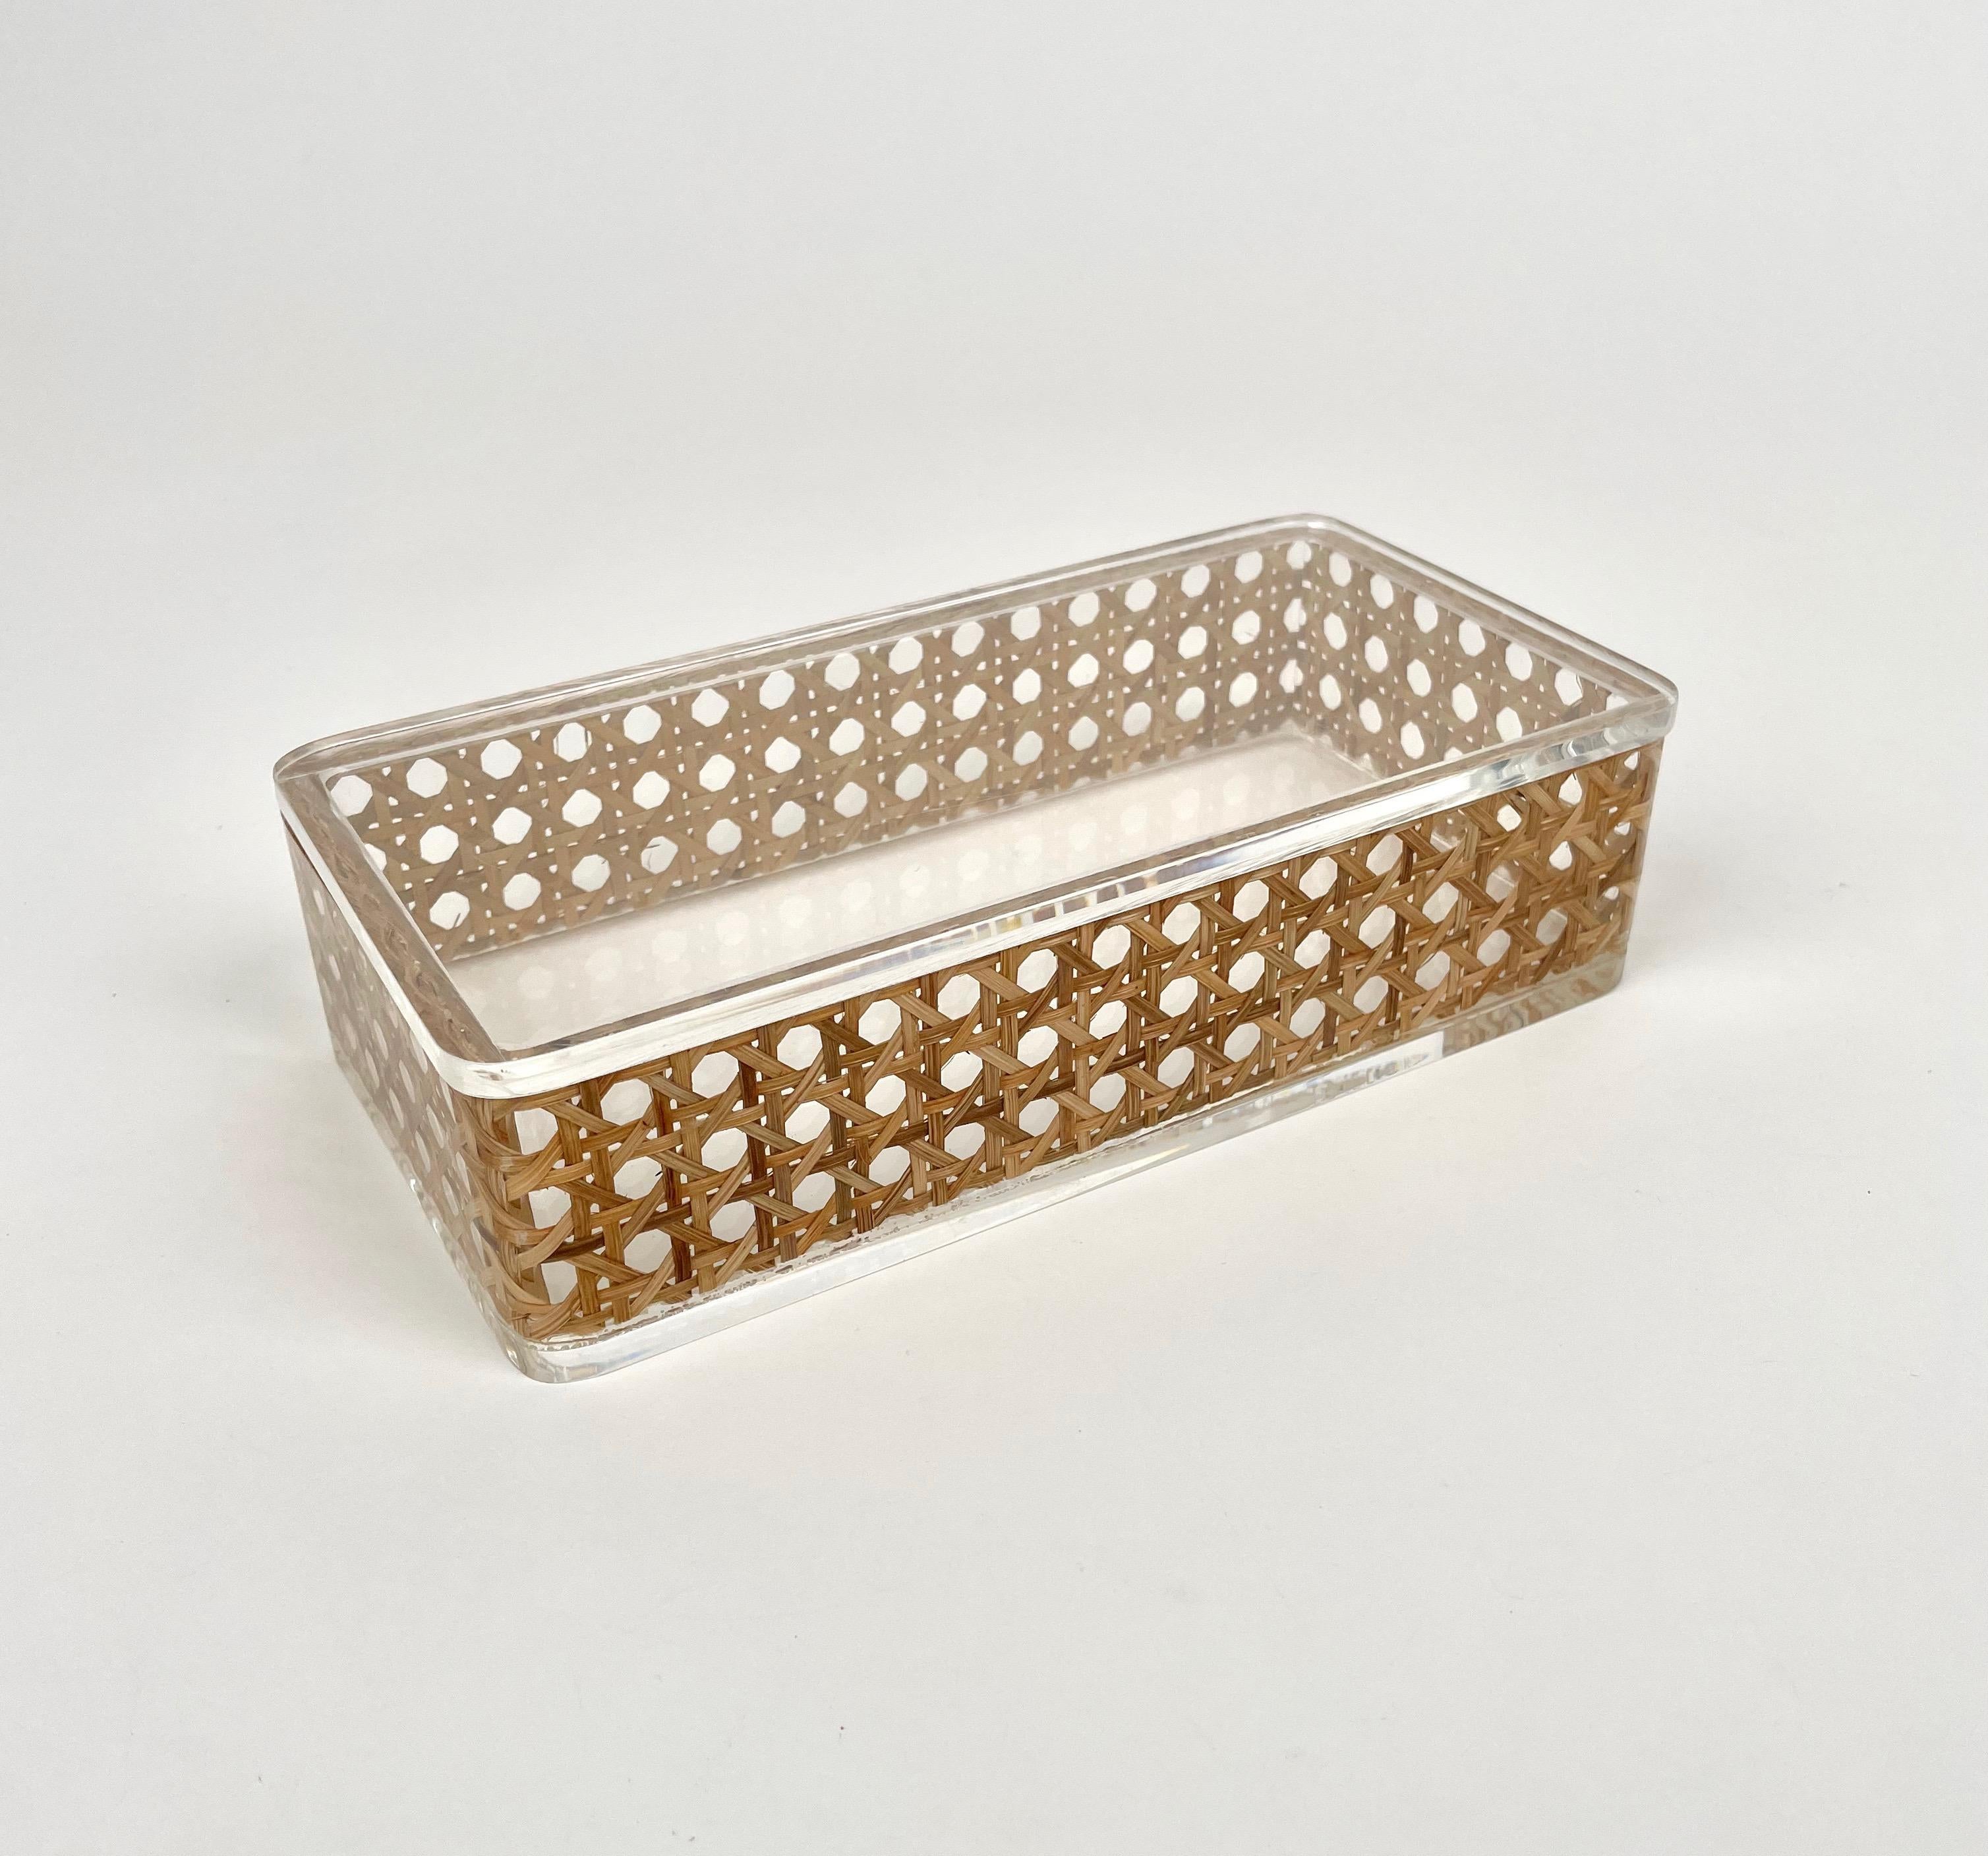 Rectangular box in lucite and rattan in the style of Christian Dior Home. 

Made in Italy in the 1970s.